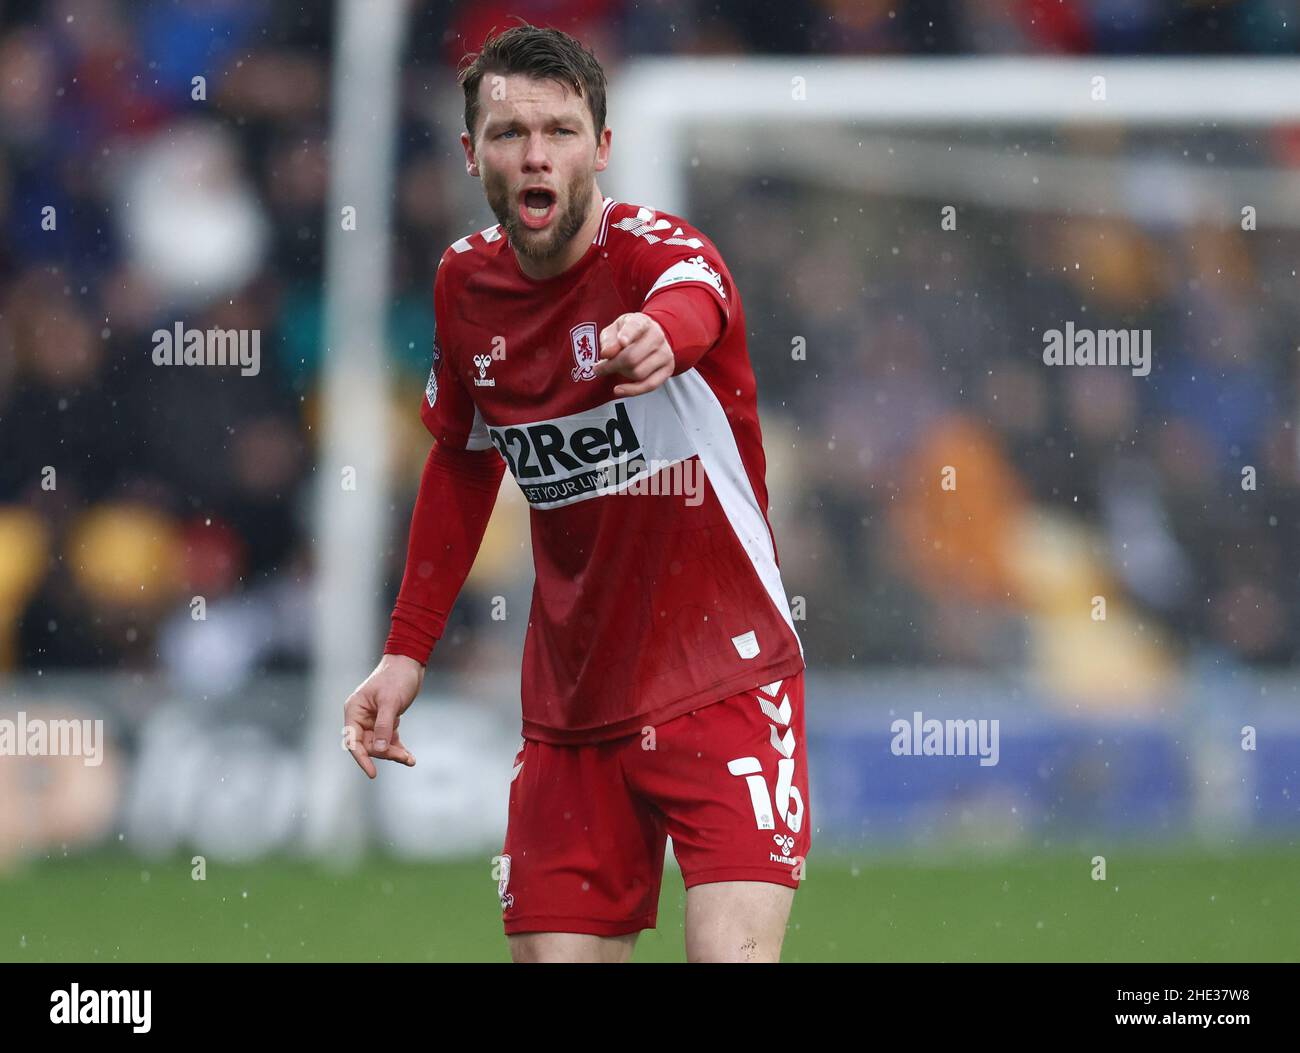 Mansfield, UK. 8th Jan, 2022. Jonny Howson of Middlesbrough during the Emirates FA Cup match at the One Call Stadium, Mansfield. Picture credit should read: Darren Staples/Sportimage Credit: Sportimage/Alamy Live News Stock Photo